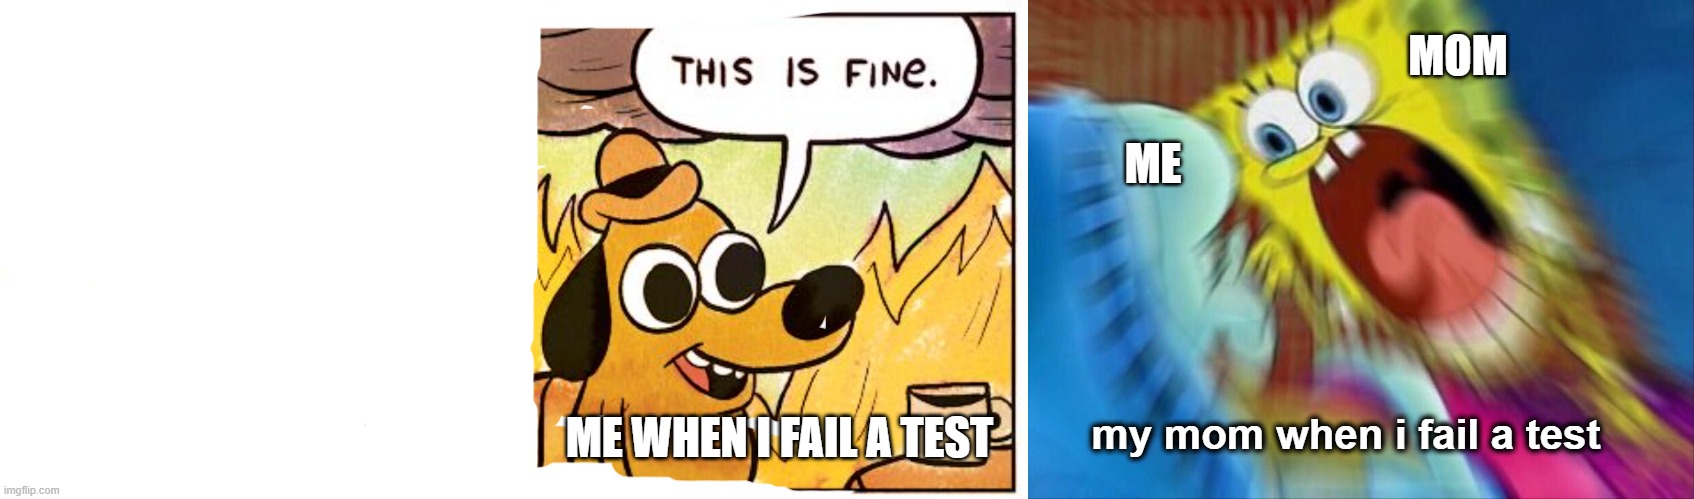 my mom if i fail a test | MOM; ME; ME WHEN I FAIL A TEST; my mom when i fail a test | image tagged in memes,this is fine,relatable,moms | made w/ Imgflip meme maker